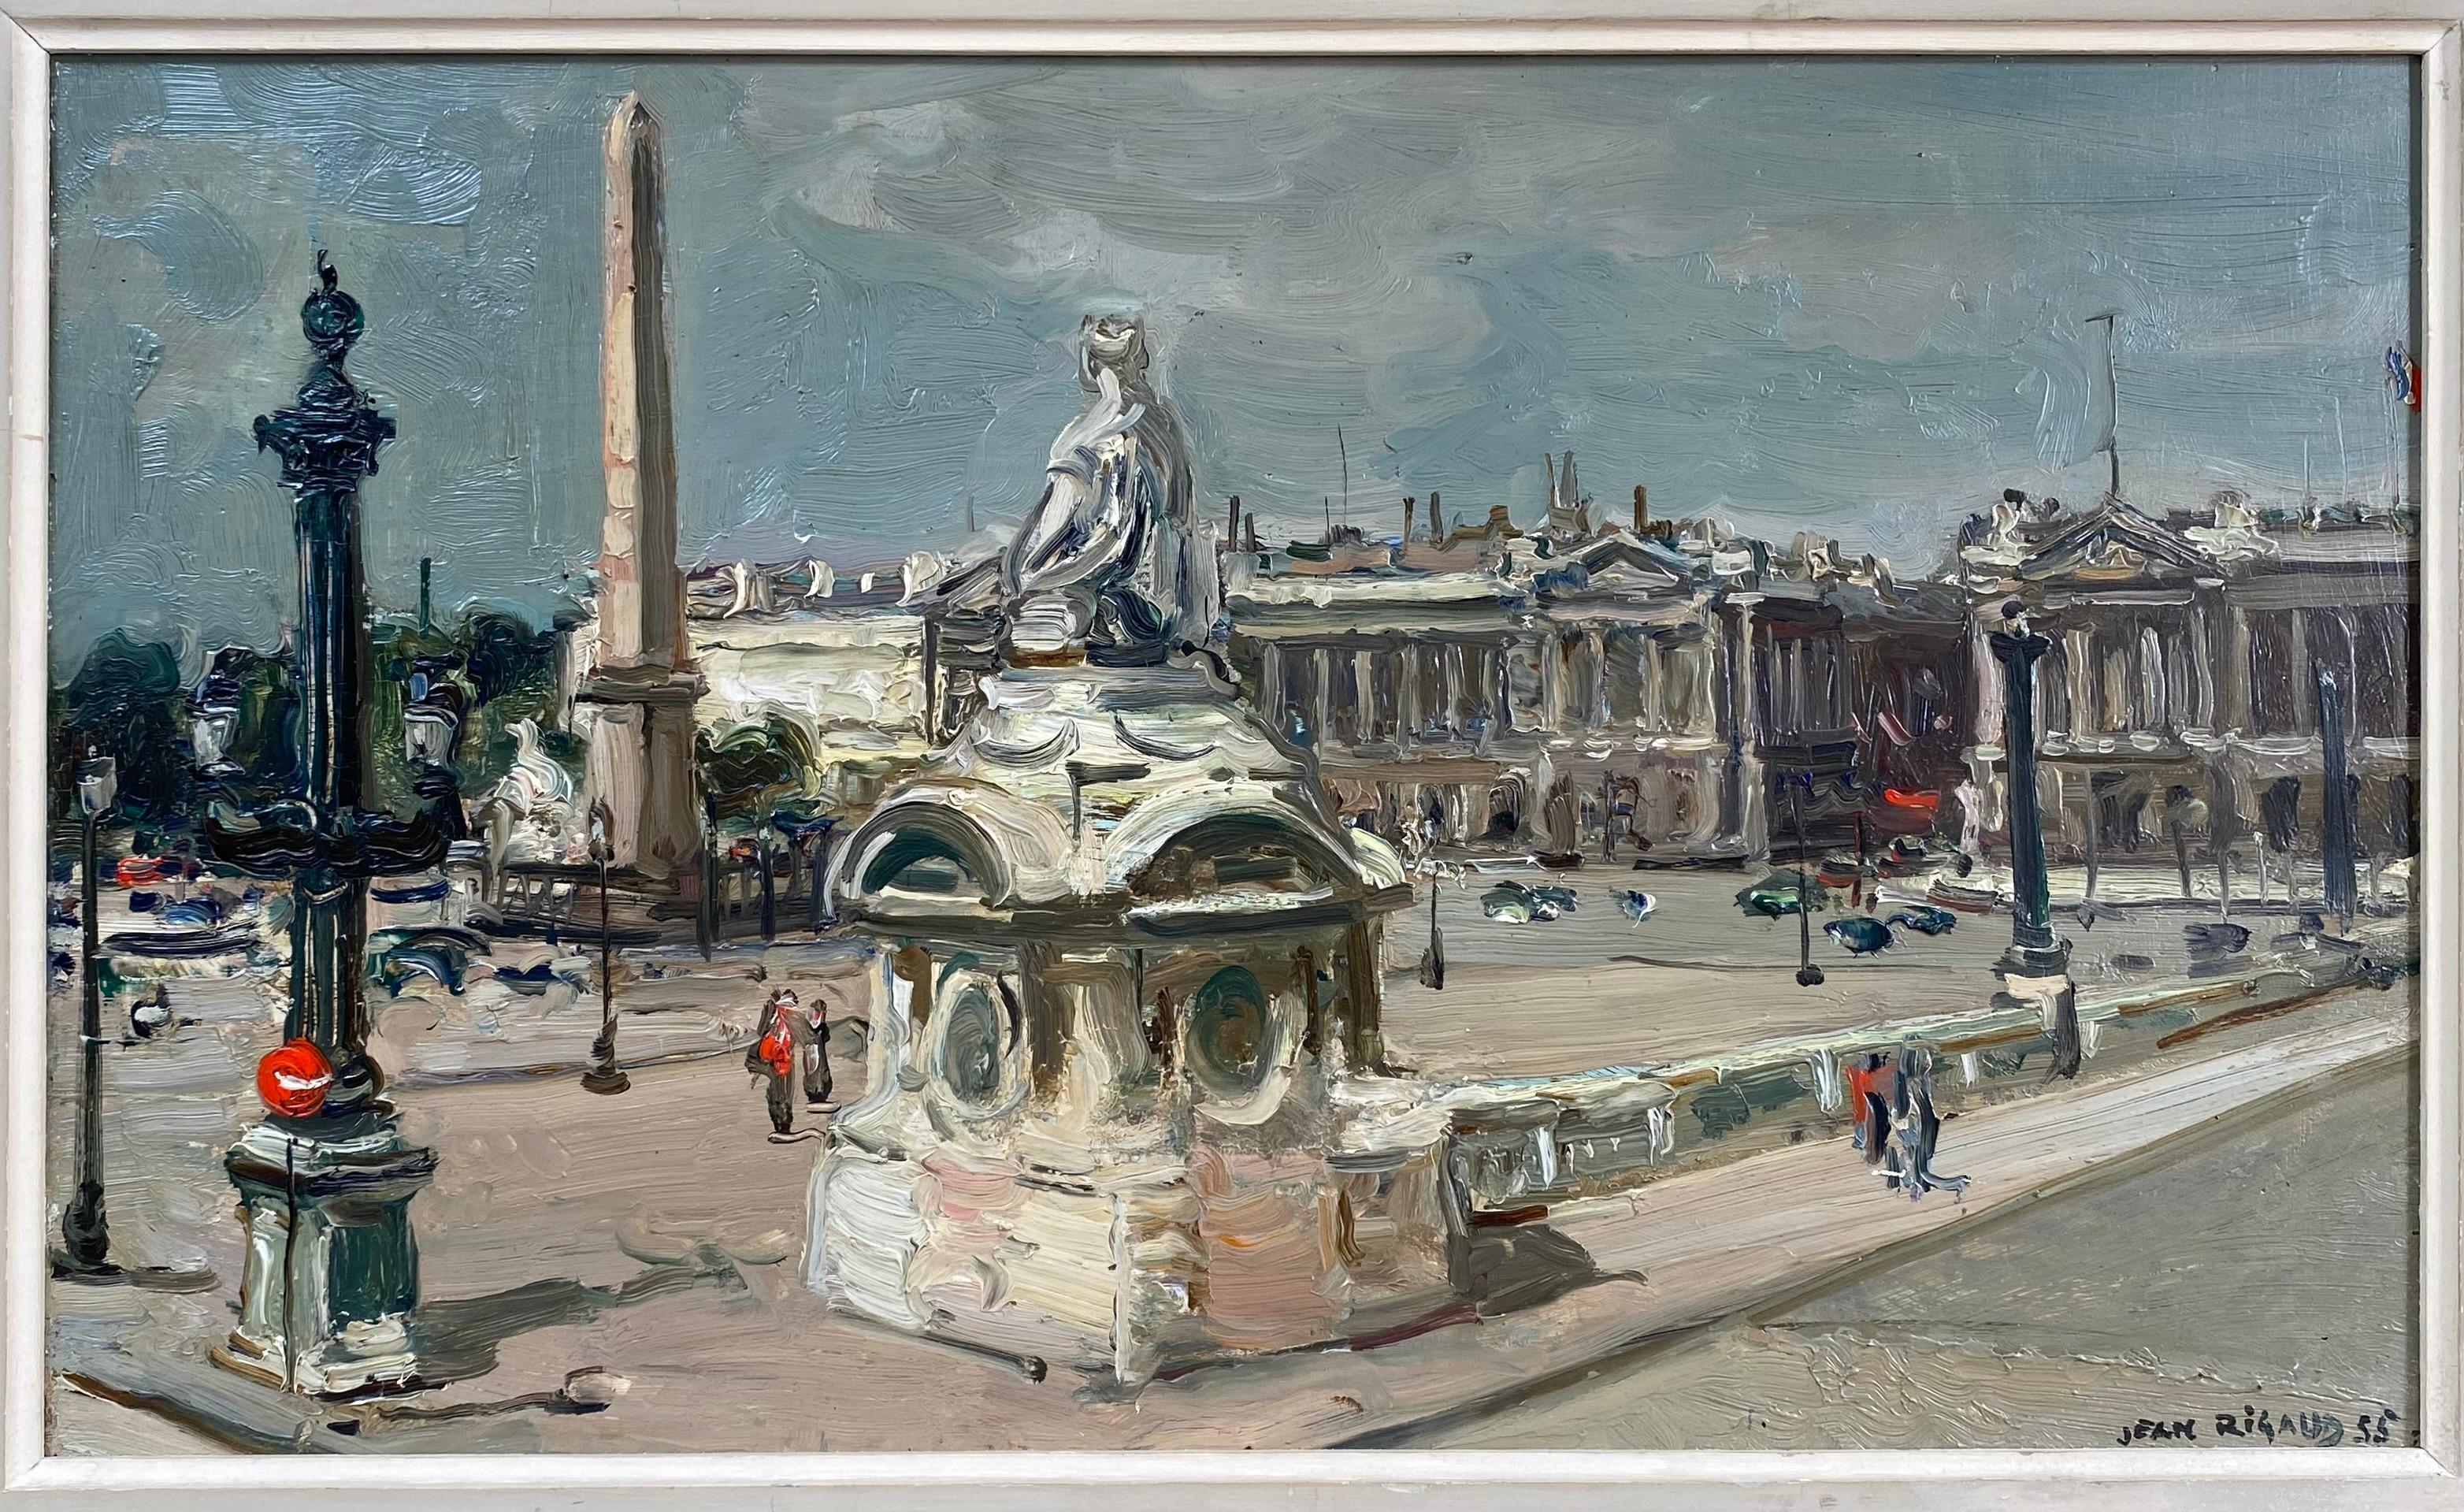 La Concorde - Post-Impressionist Painting by Jean Rigaud